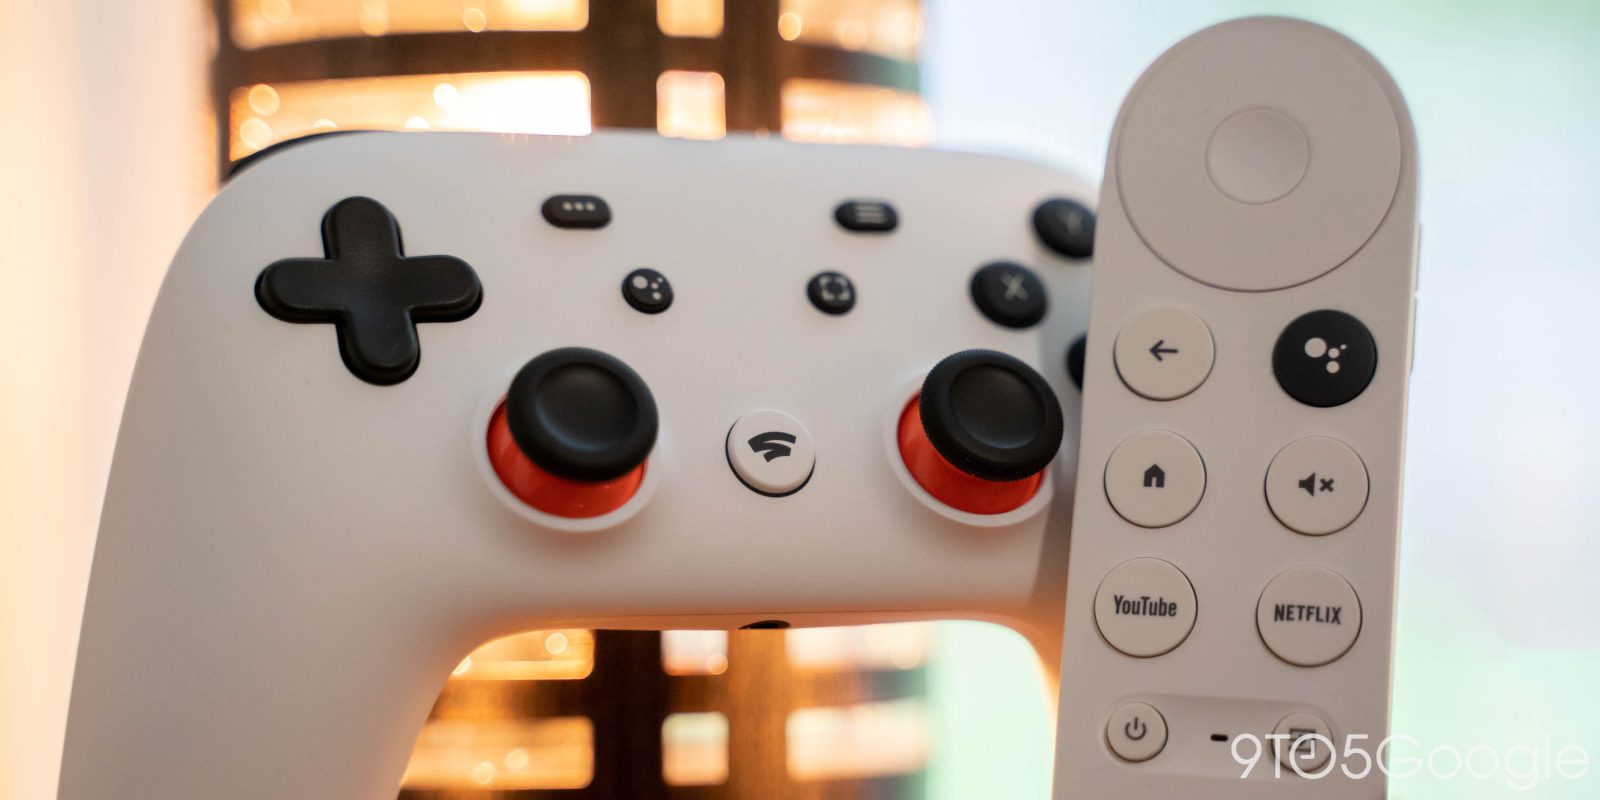 Stadia Controller and Chromecast with Google TV remote